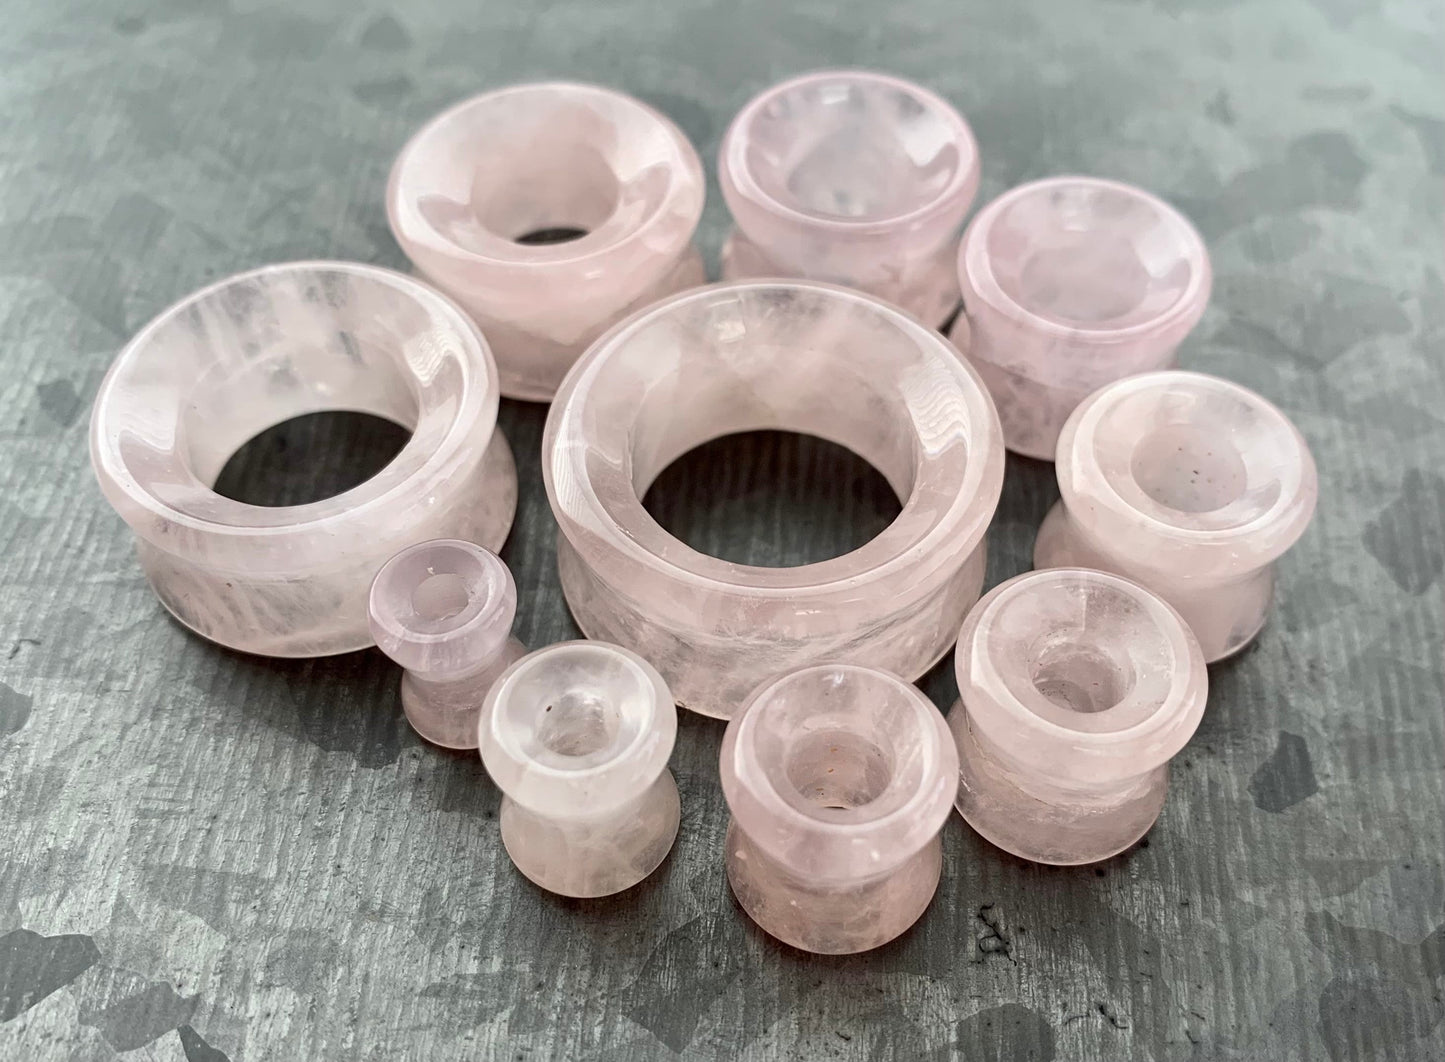 PAIR of Stunning Rose Quartz Natural Stone Double Flare Tunnels / Plugs - Gauges 2g (6mm) up to 1" (25mm) available!